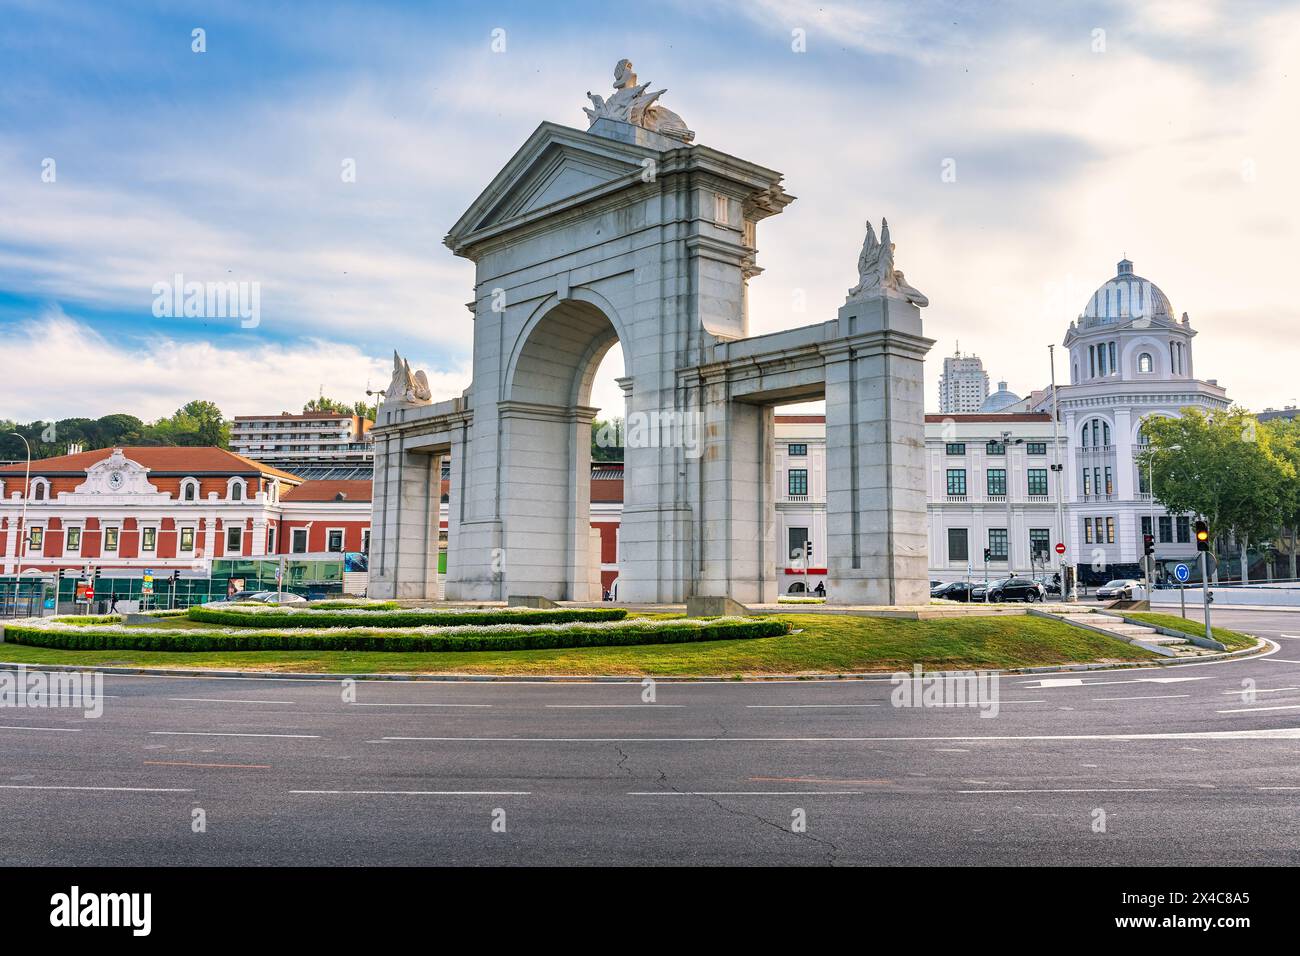 Puerta de San Vicente, southern entrance to the capital of Spain, Madrid. Stock Photo